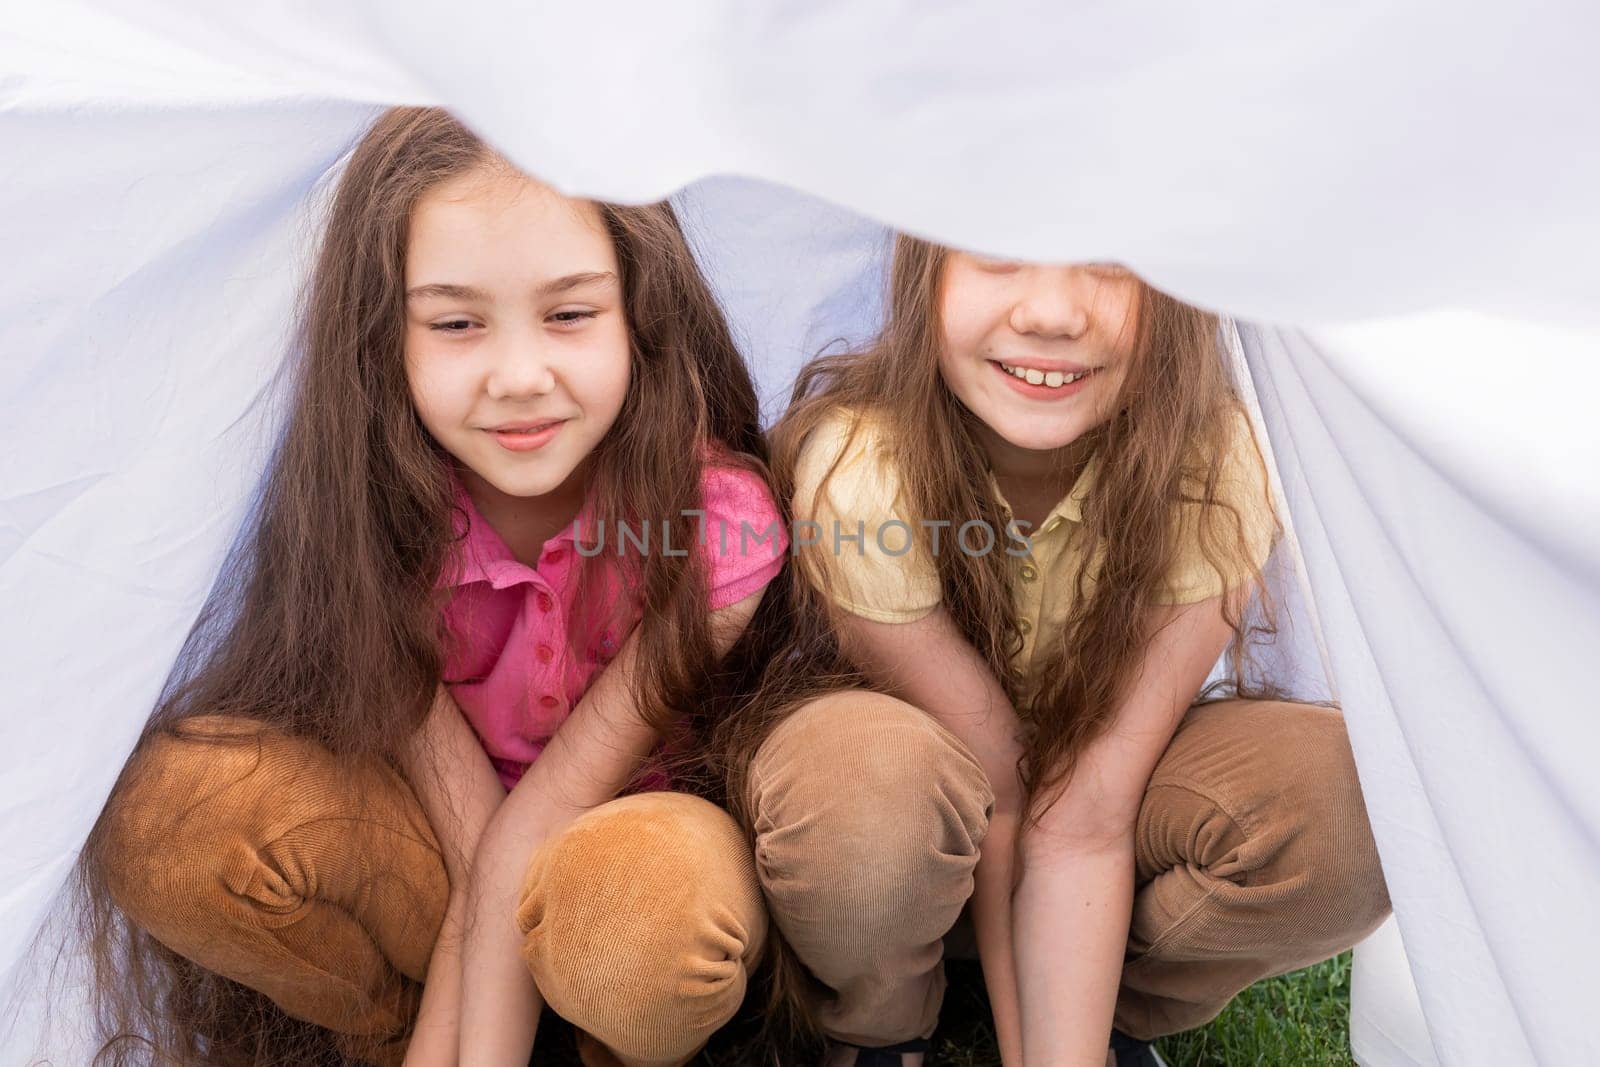 Two Little Girls, Sisters With Long Hair Sits Under Sheet On Grass in Meadow. Caucasian Asian Siblings Having Fun, Joy Together. Family Love And Care, True Friendship. Horizontal Plane. High quality photo